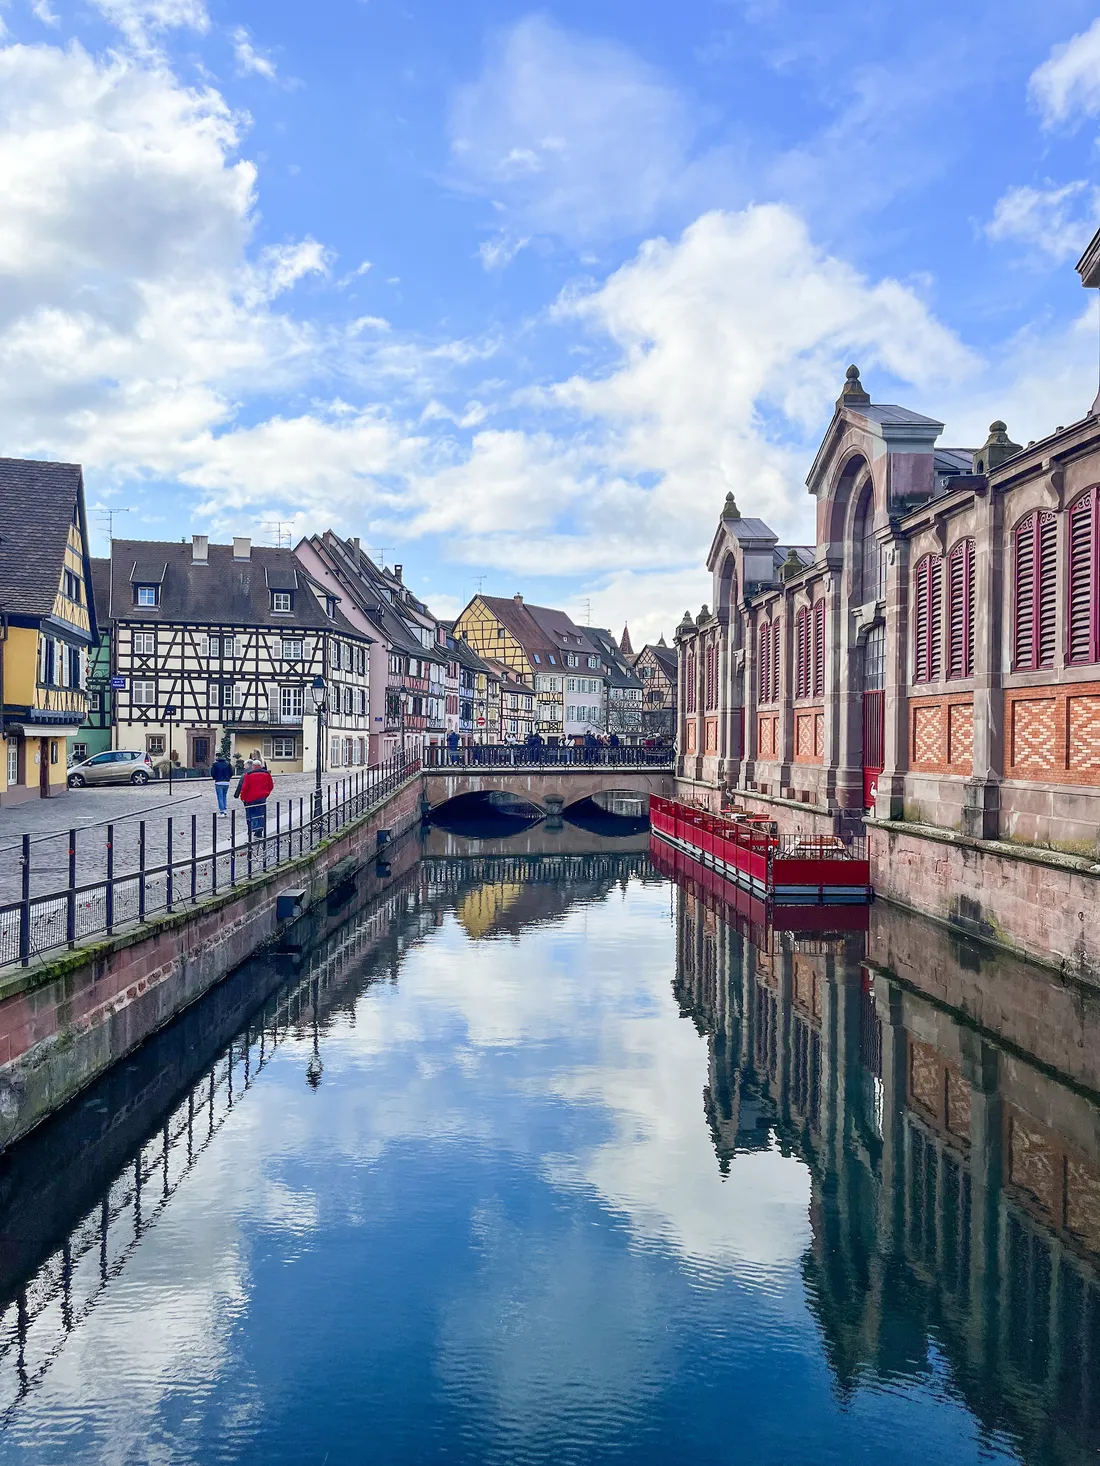 Water canal in Strasbourg, France.